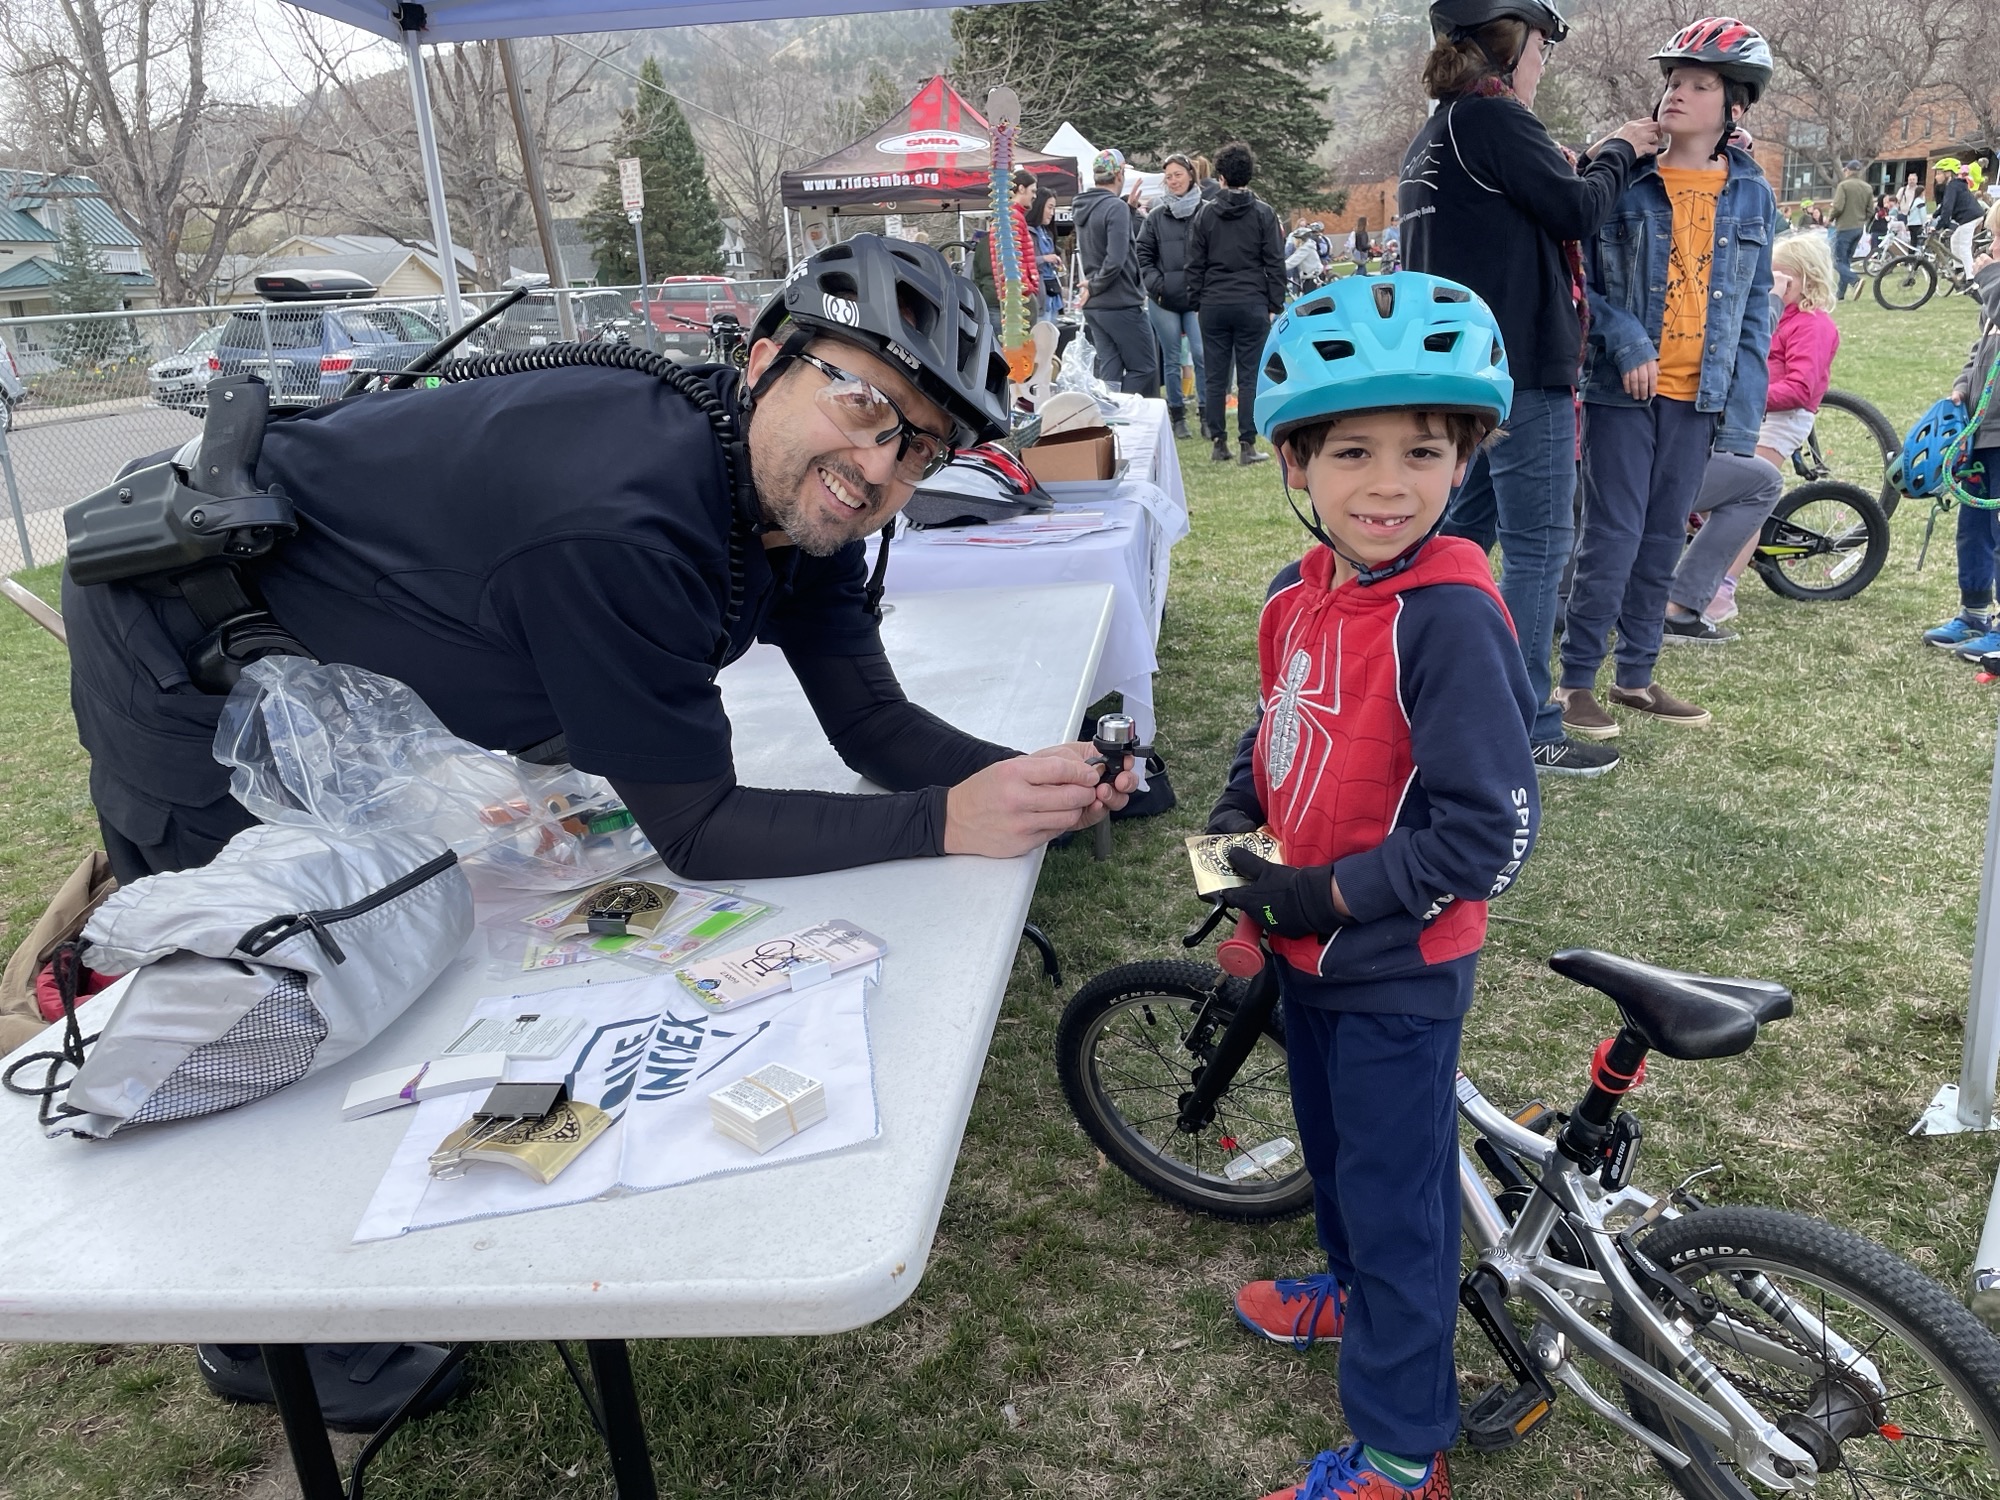 A Boulder Police Officer talking with a child wearing a helmet at a bike safety event